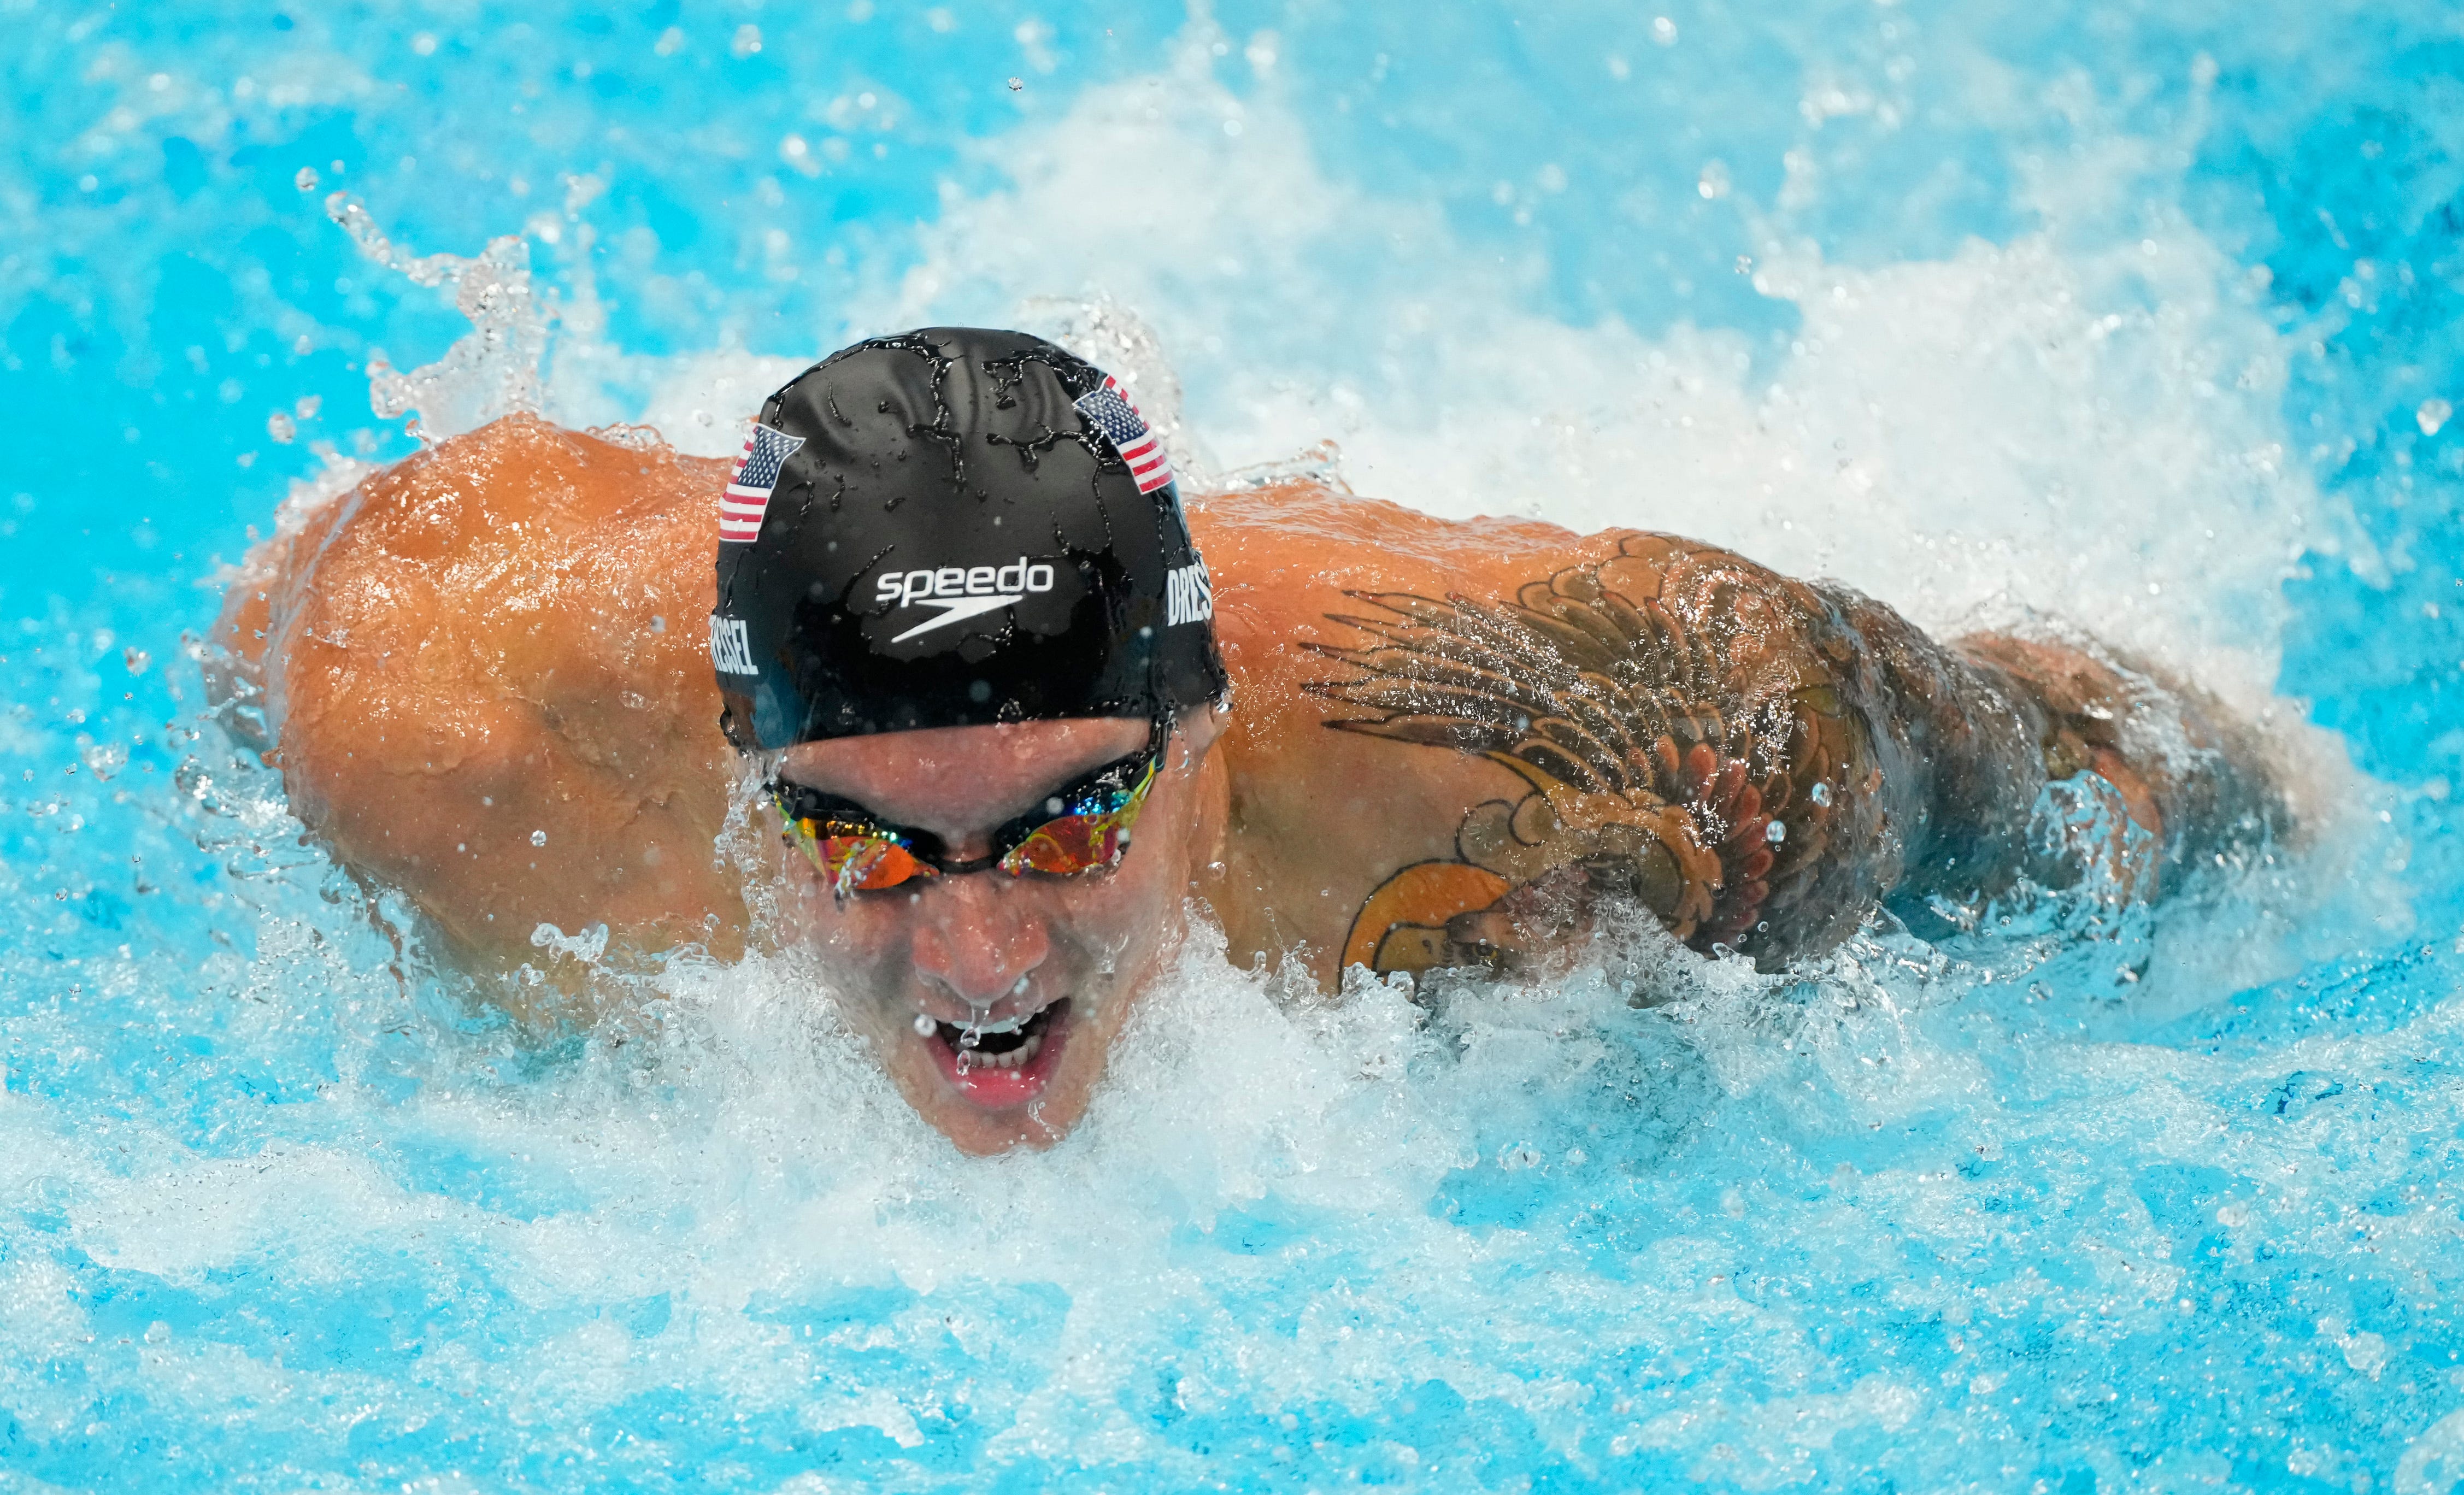 Caeleb Dressel (USA) in the men's 100m butterfly semifinals during the Tokyo 2020 Olympic Summer Games at Tokyo Aquatics Centre on Jul 30, 2021.